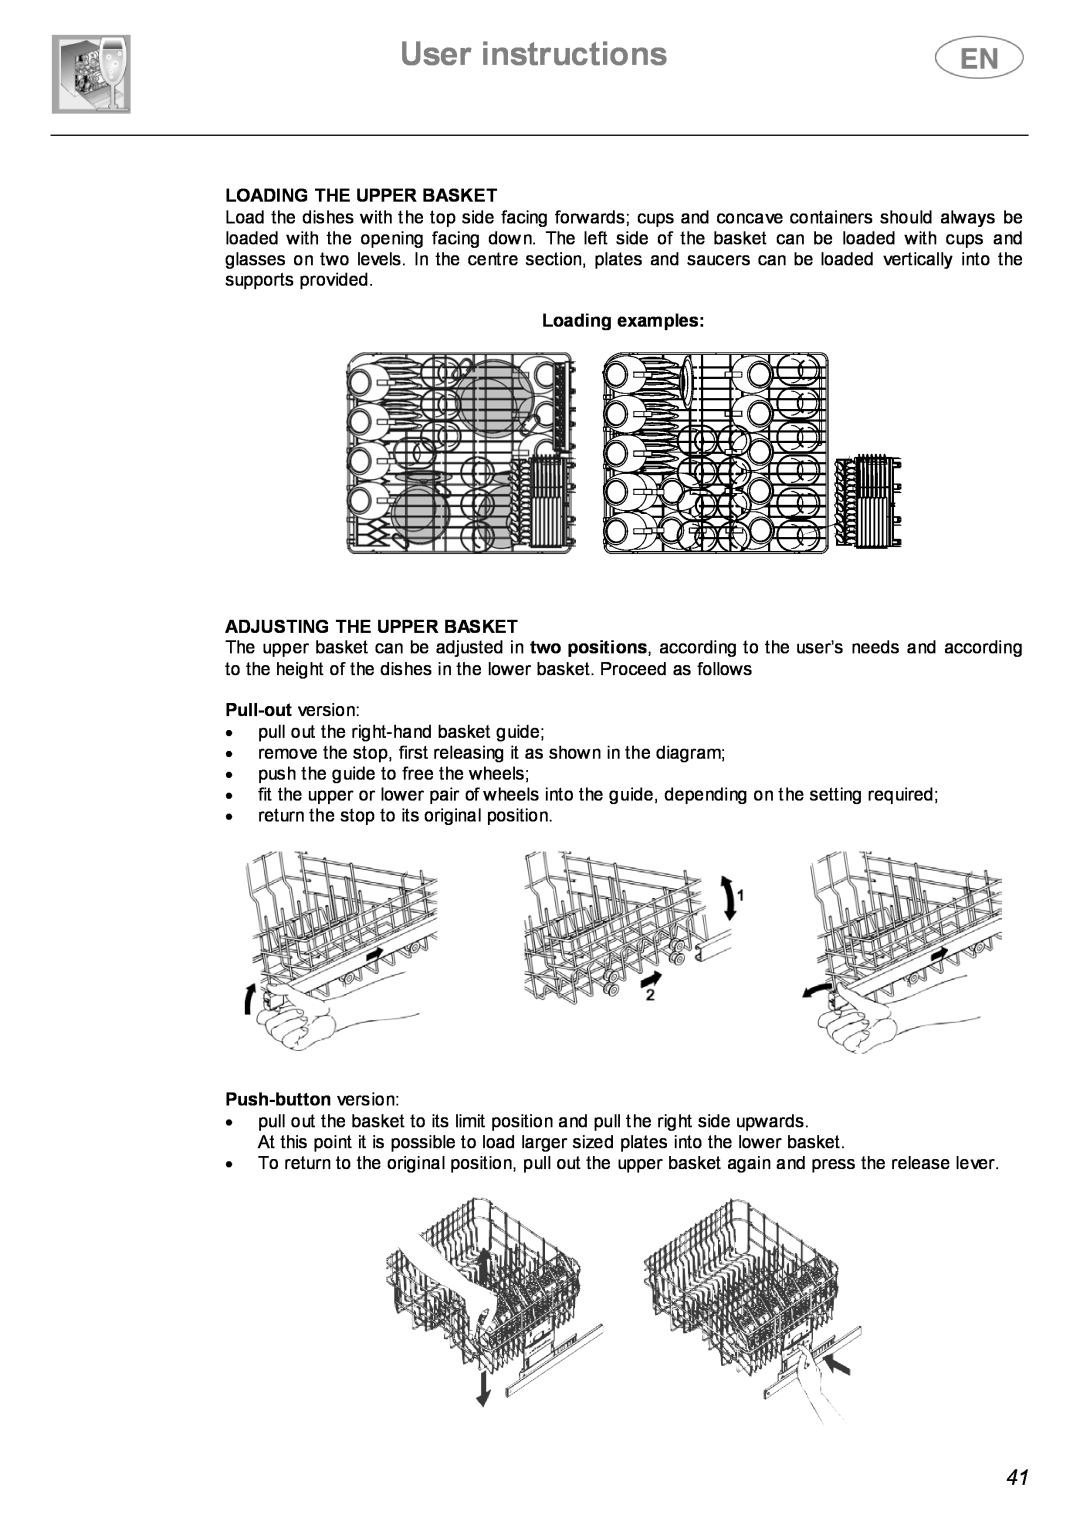 Smeg DWF614SS User instructions, Loading The Upper Basket, Loading examples ADJUSTING THE UPPER BASKET, Pull-out version 